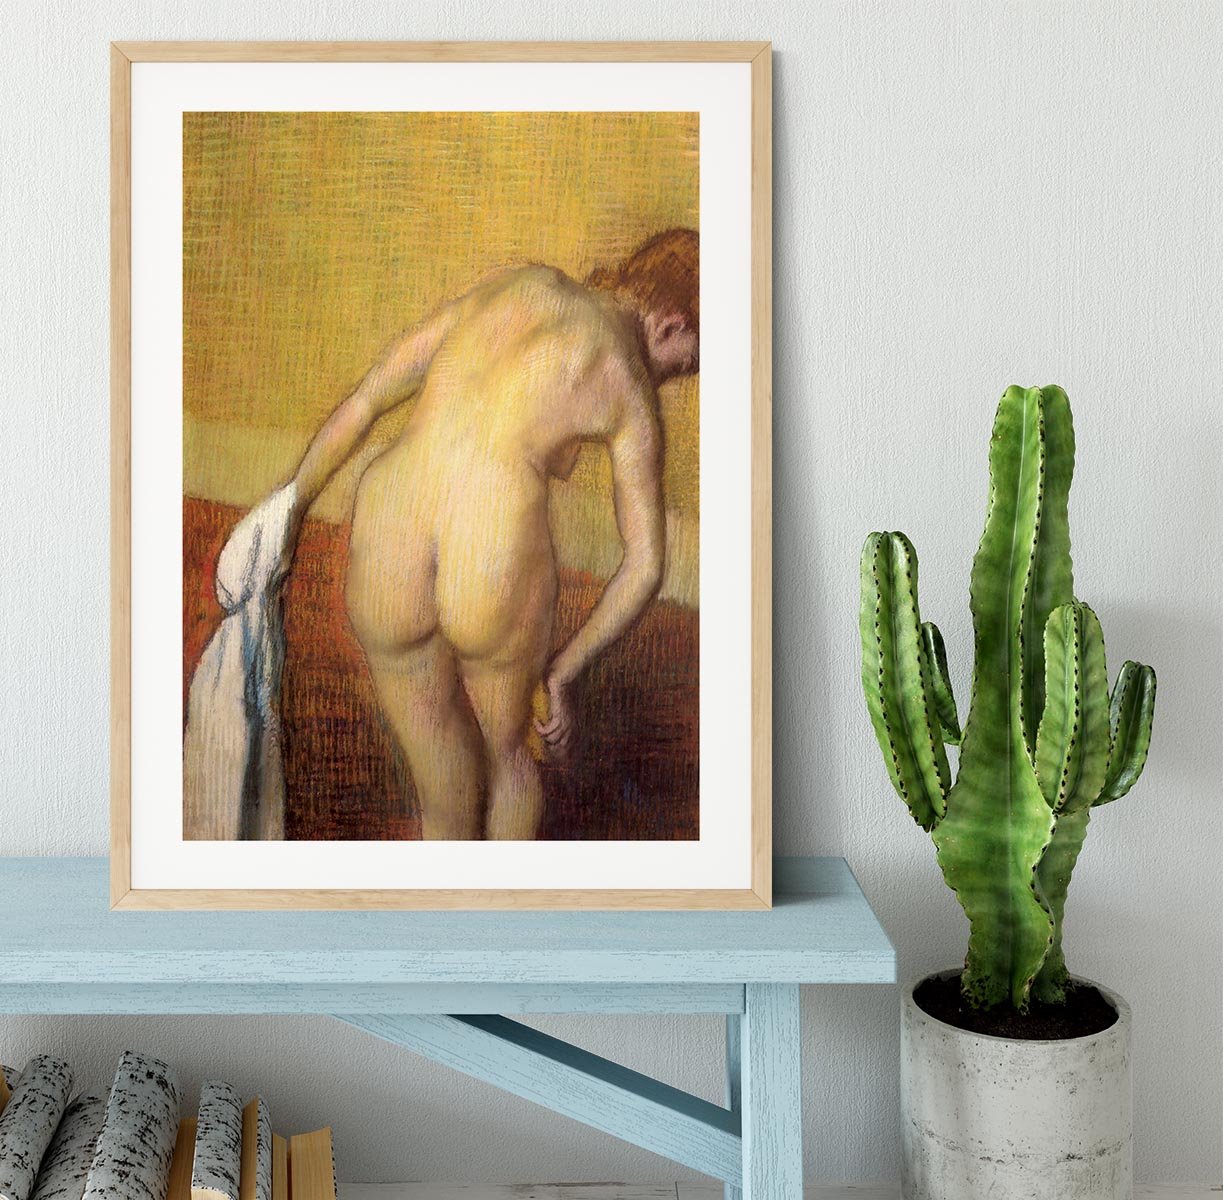 Woman Drying with towel and sponge by Degas Framed Print - Canvas Art Rocks - 3